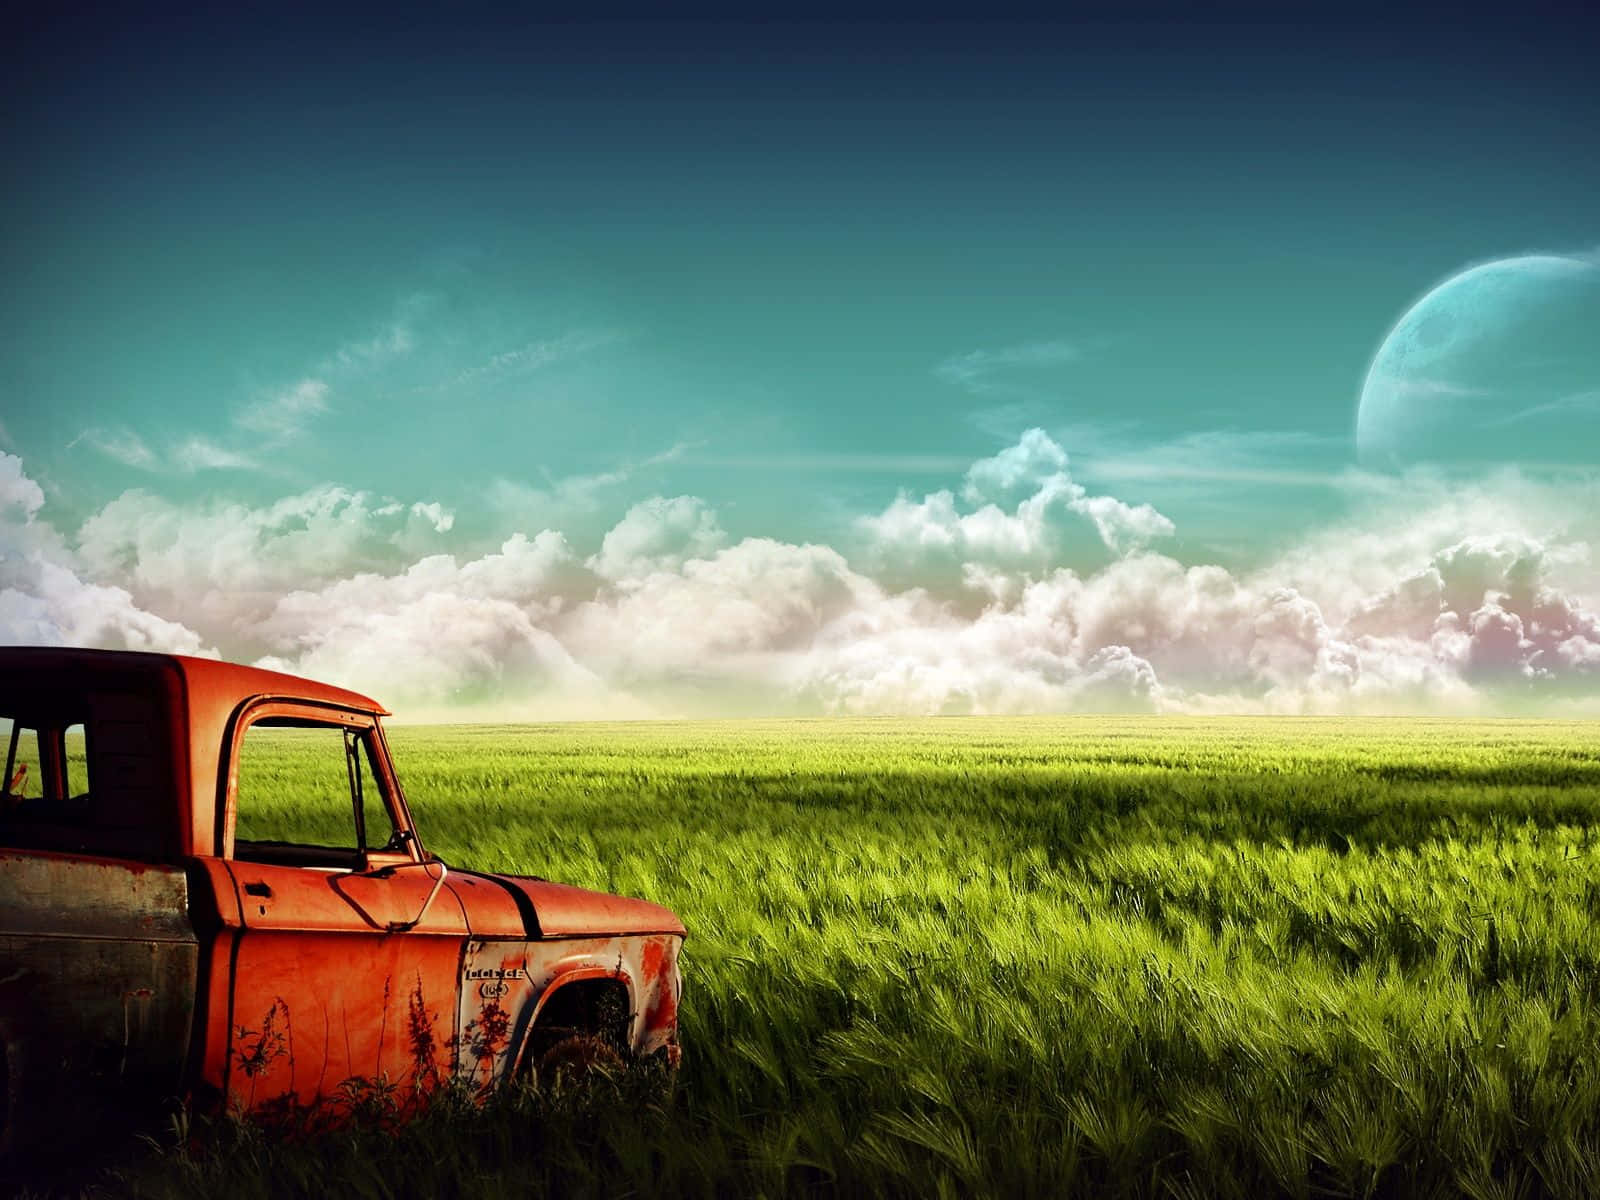 An Old Truck In A Field With Clouds